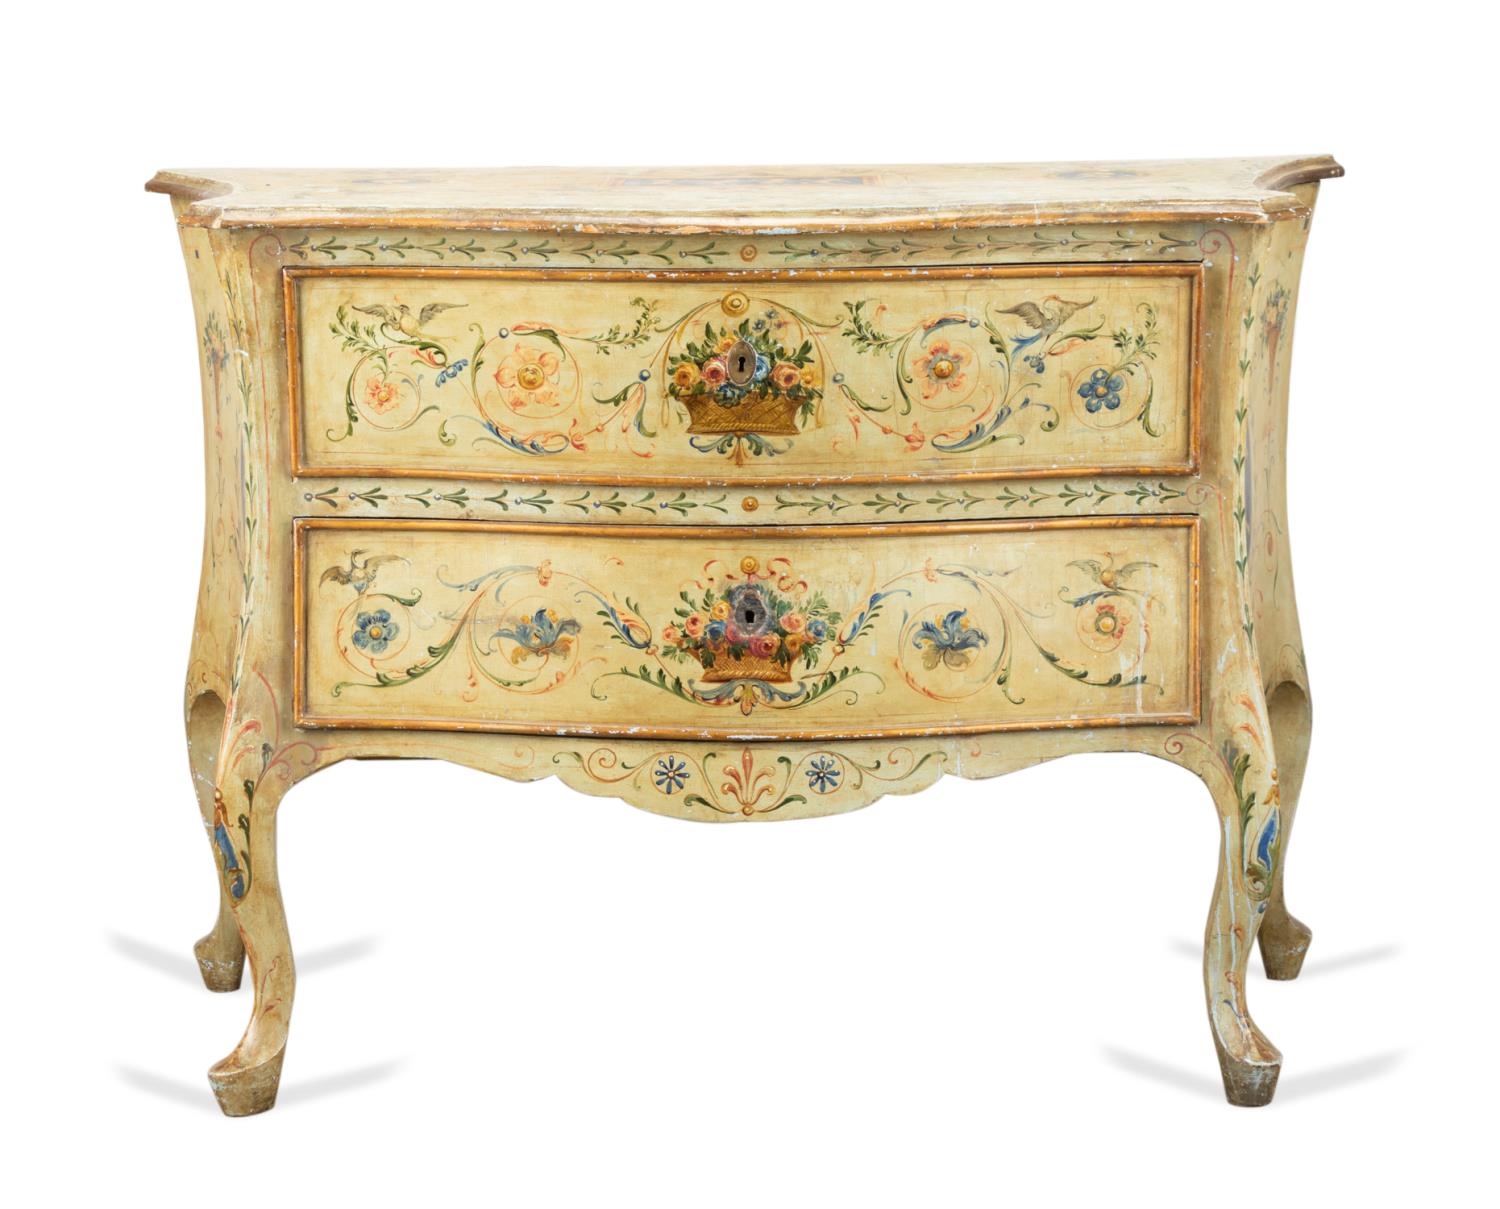 VENETIAN POLYCHROME PAINTED COMMODE  3cd36f